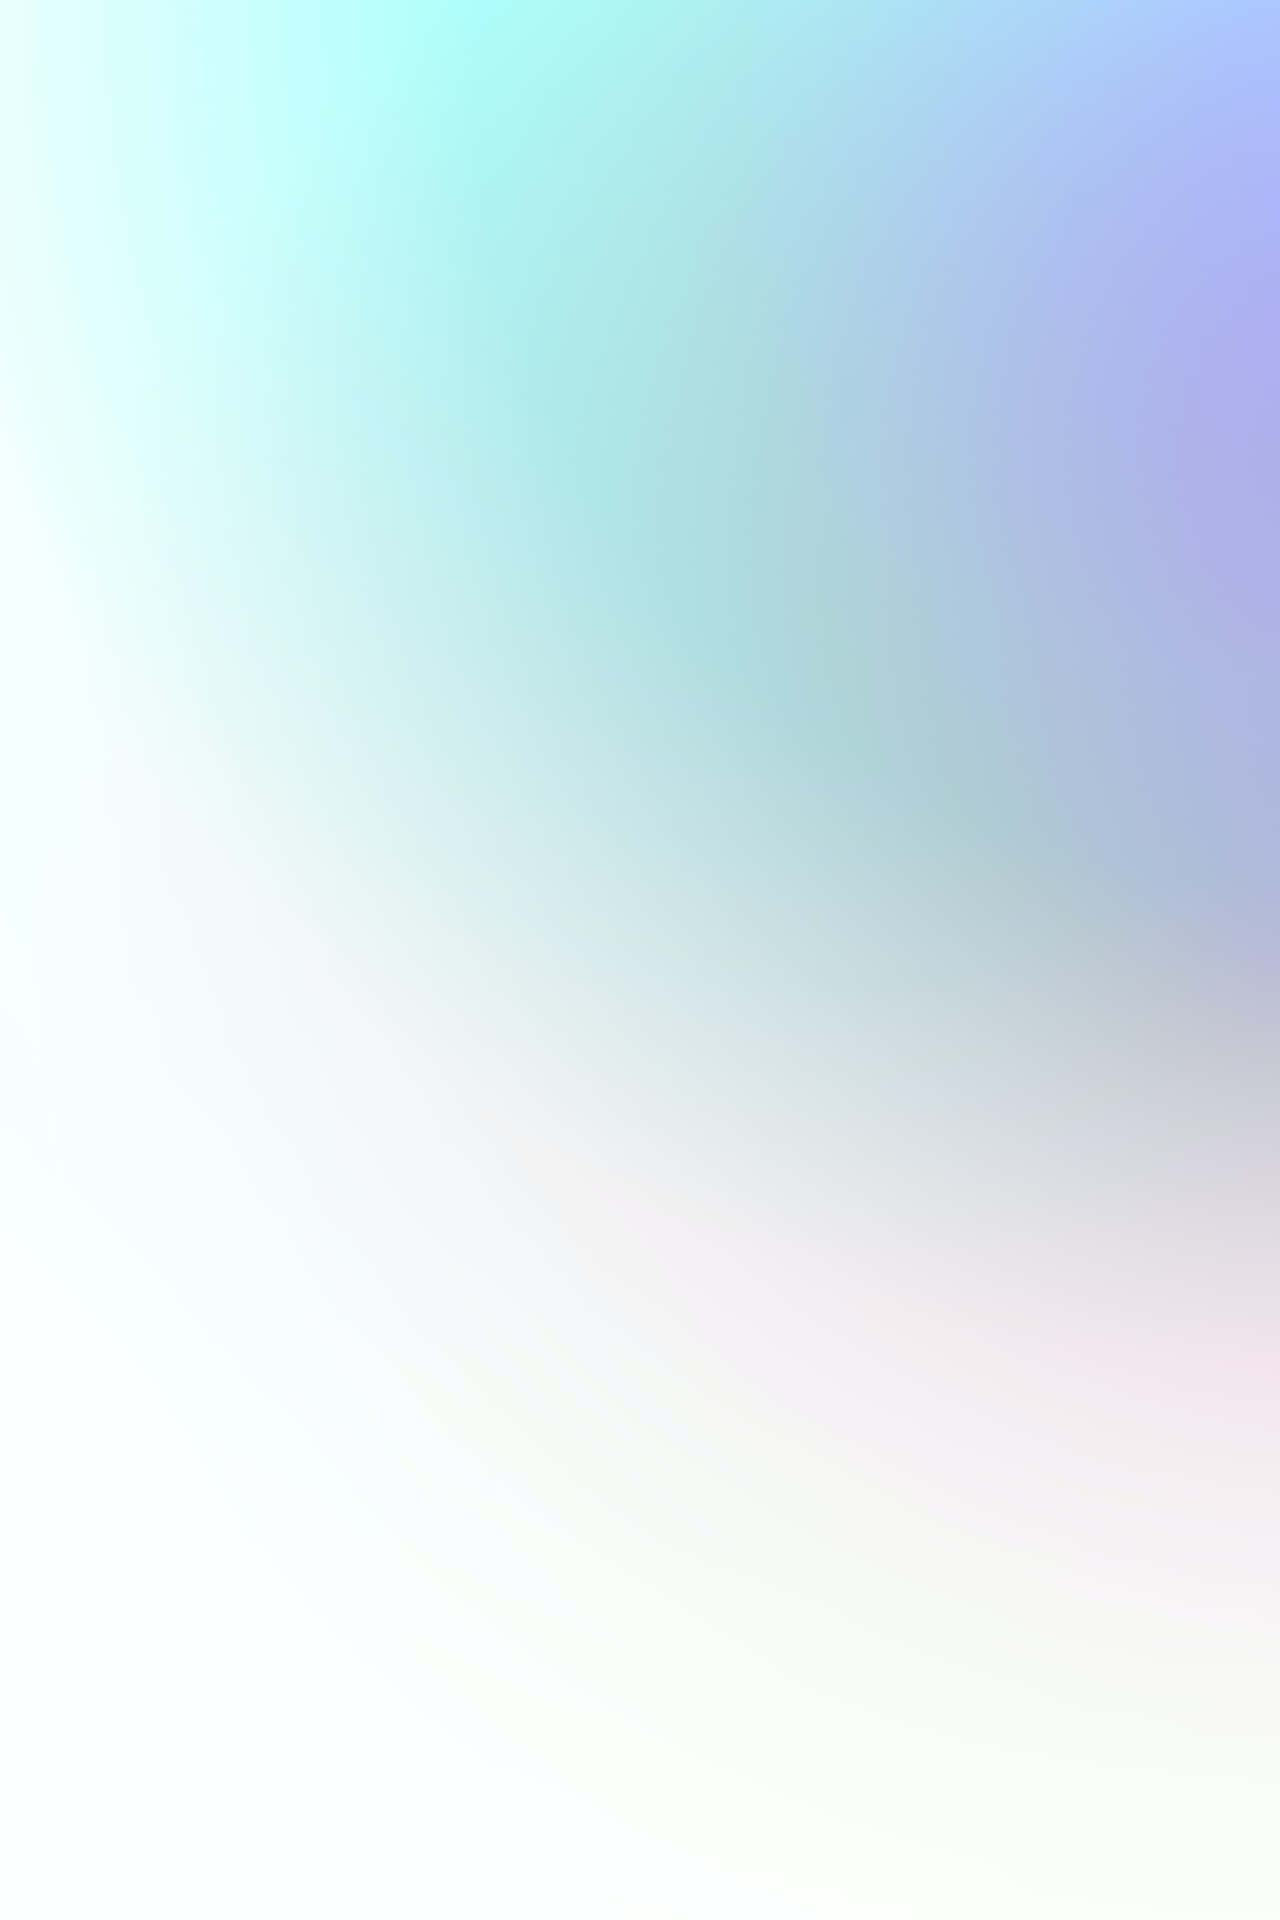 A Blue And White Abstract Background With A Rainbow